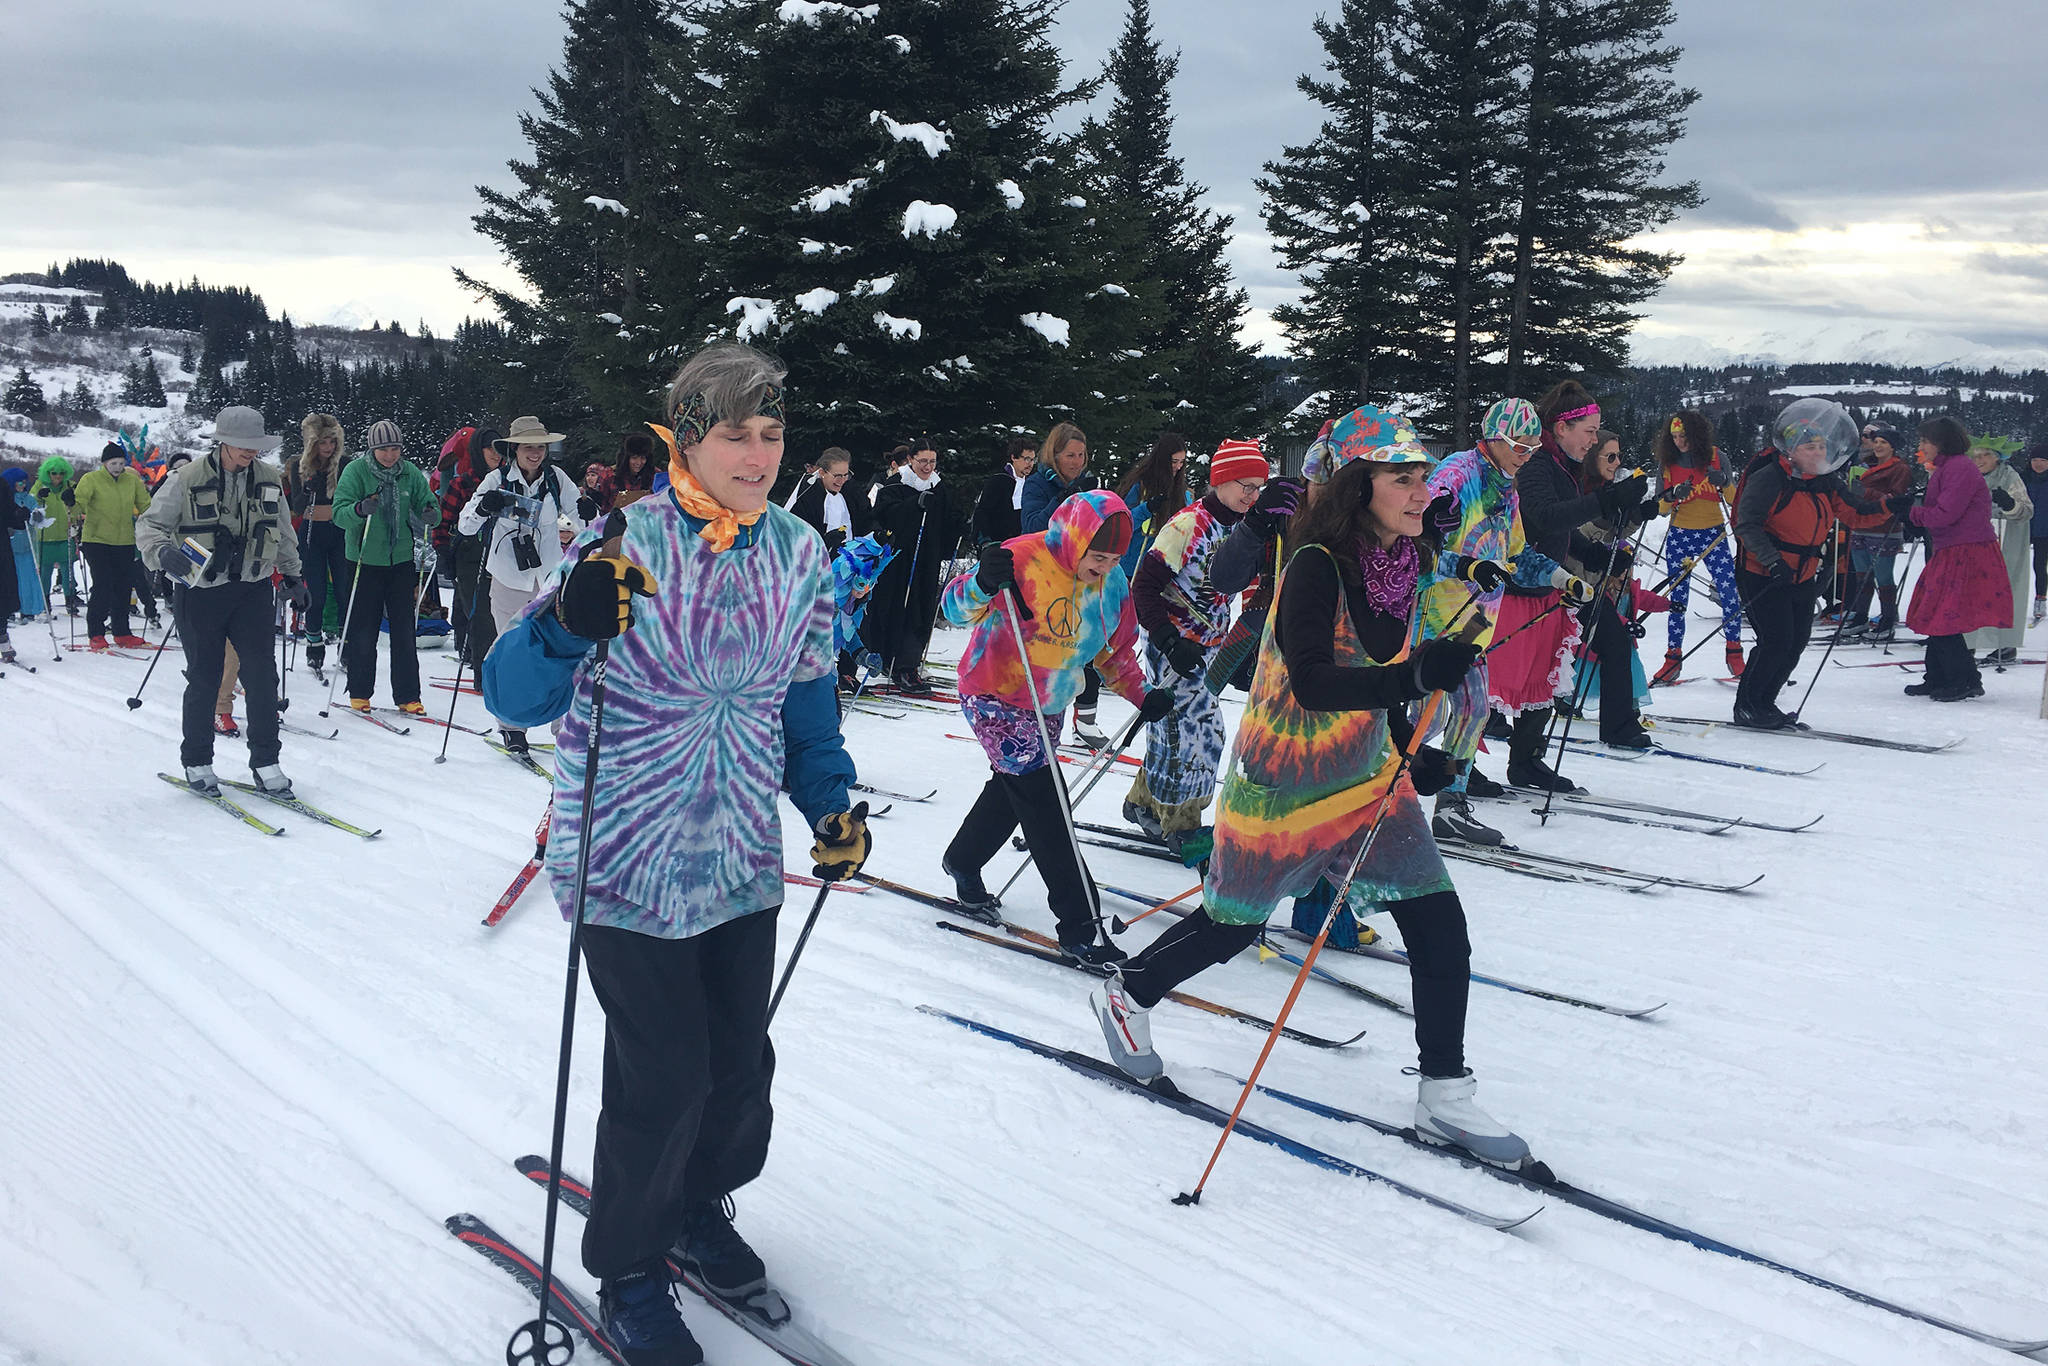 Skiers young and old take off at the start of the annual Ski for Women, which benefits South Peninsula Haven House, on Sunday, Feb. 3, 2019 at the Lookout Mountain Trails near Homer, Alaska. (Photo by Megan Pacer/Homer News)